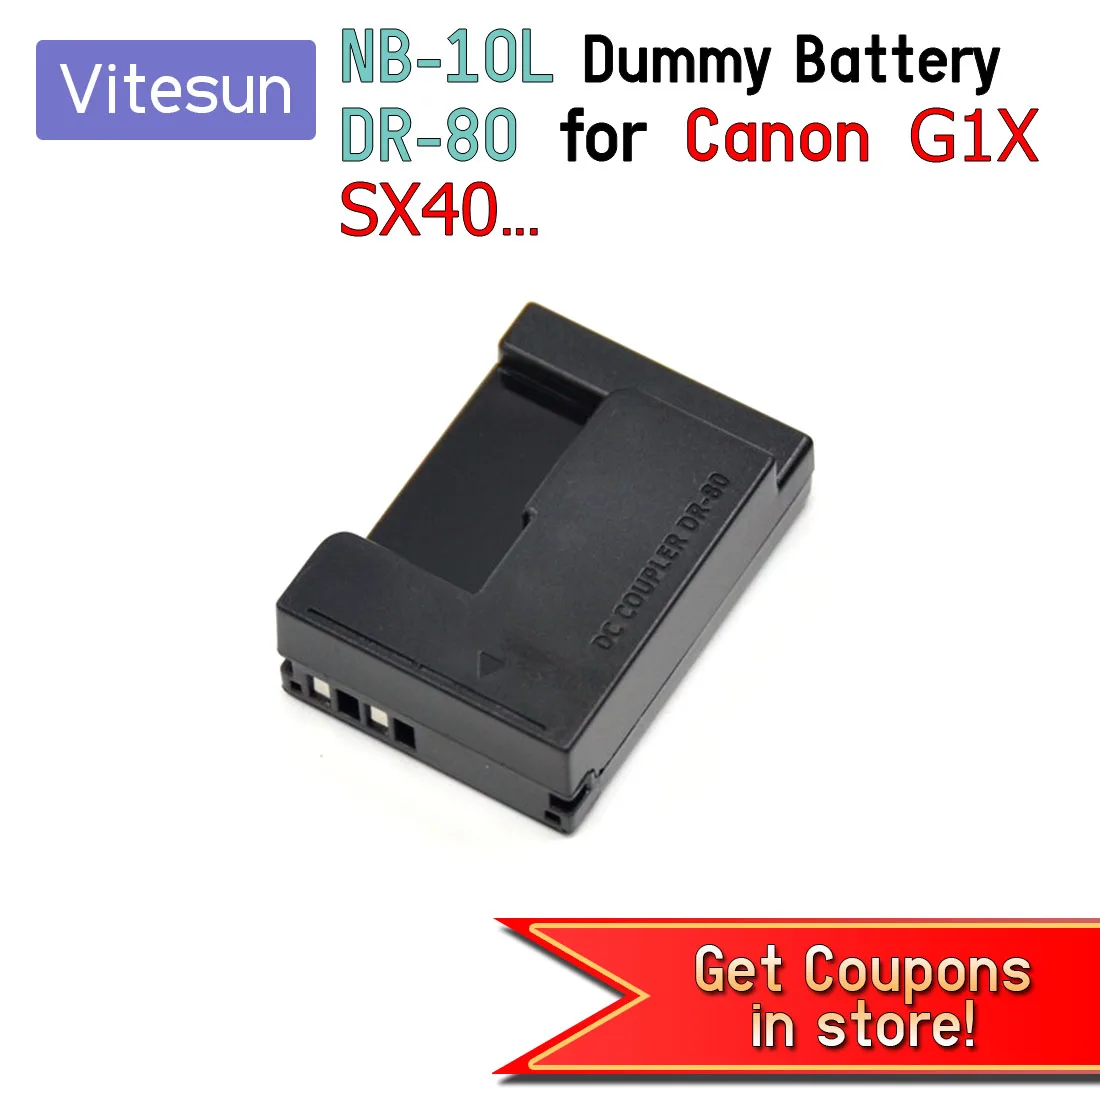 

Vitesun DC Coupler NB-10L NB10L Dummy Battery DR80 DR-80 fit Power Adapter for Canon PowerShot G1X G15 G16 SX40 SX50 and SX60